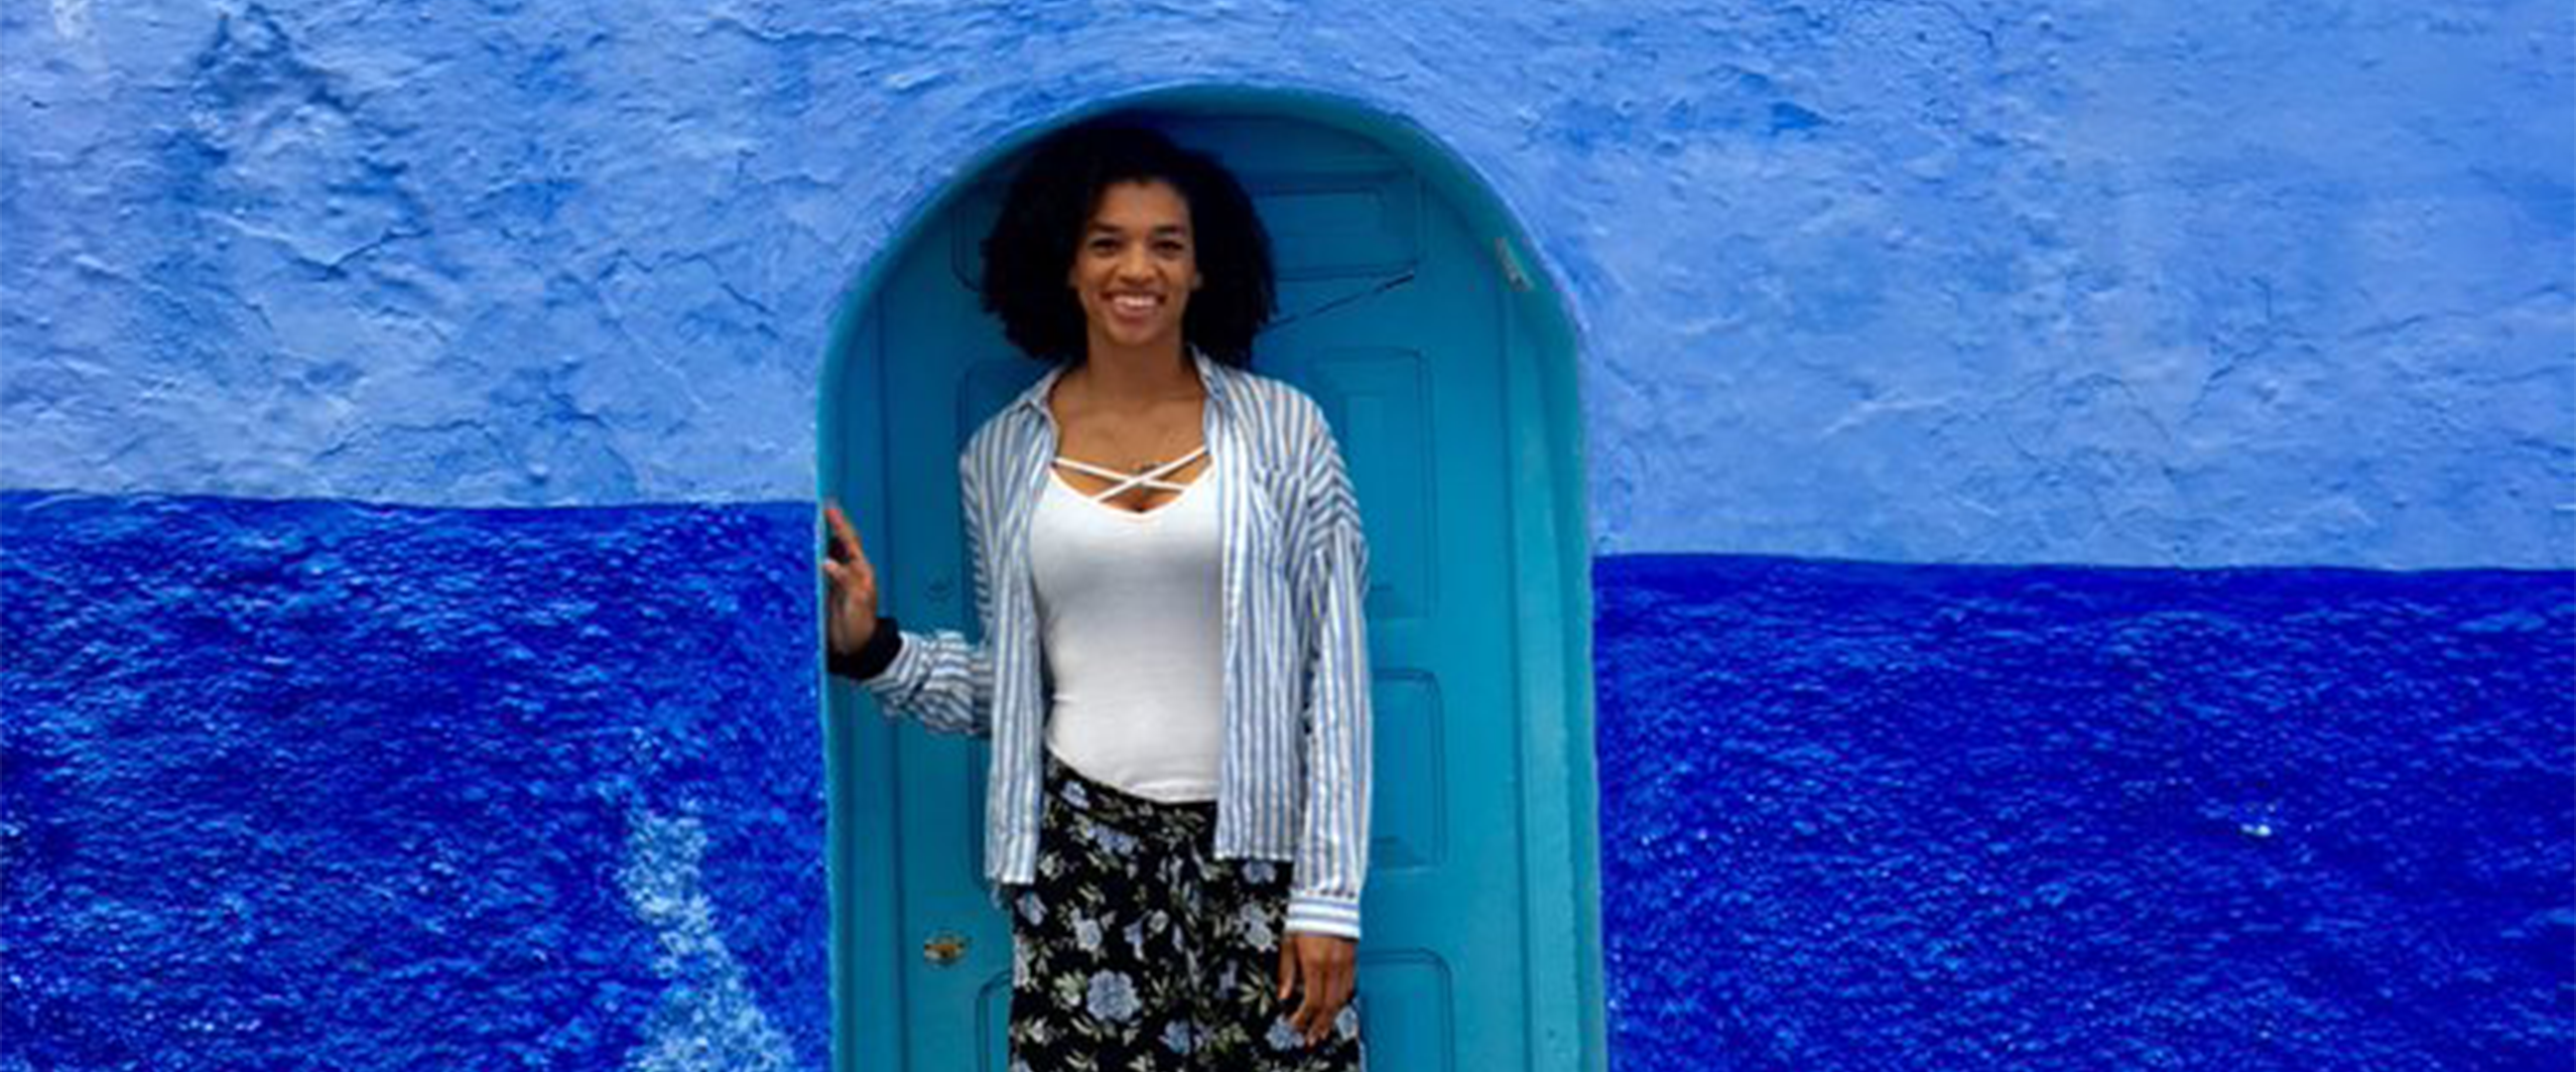 Michael posing in front of one of the blue doors in Morocco, during her study abroad experience